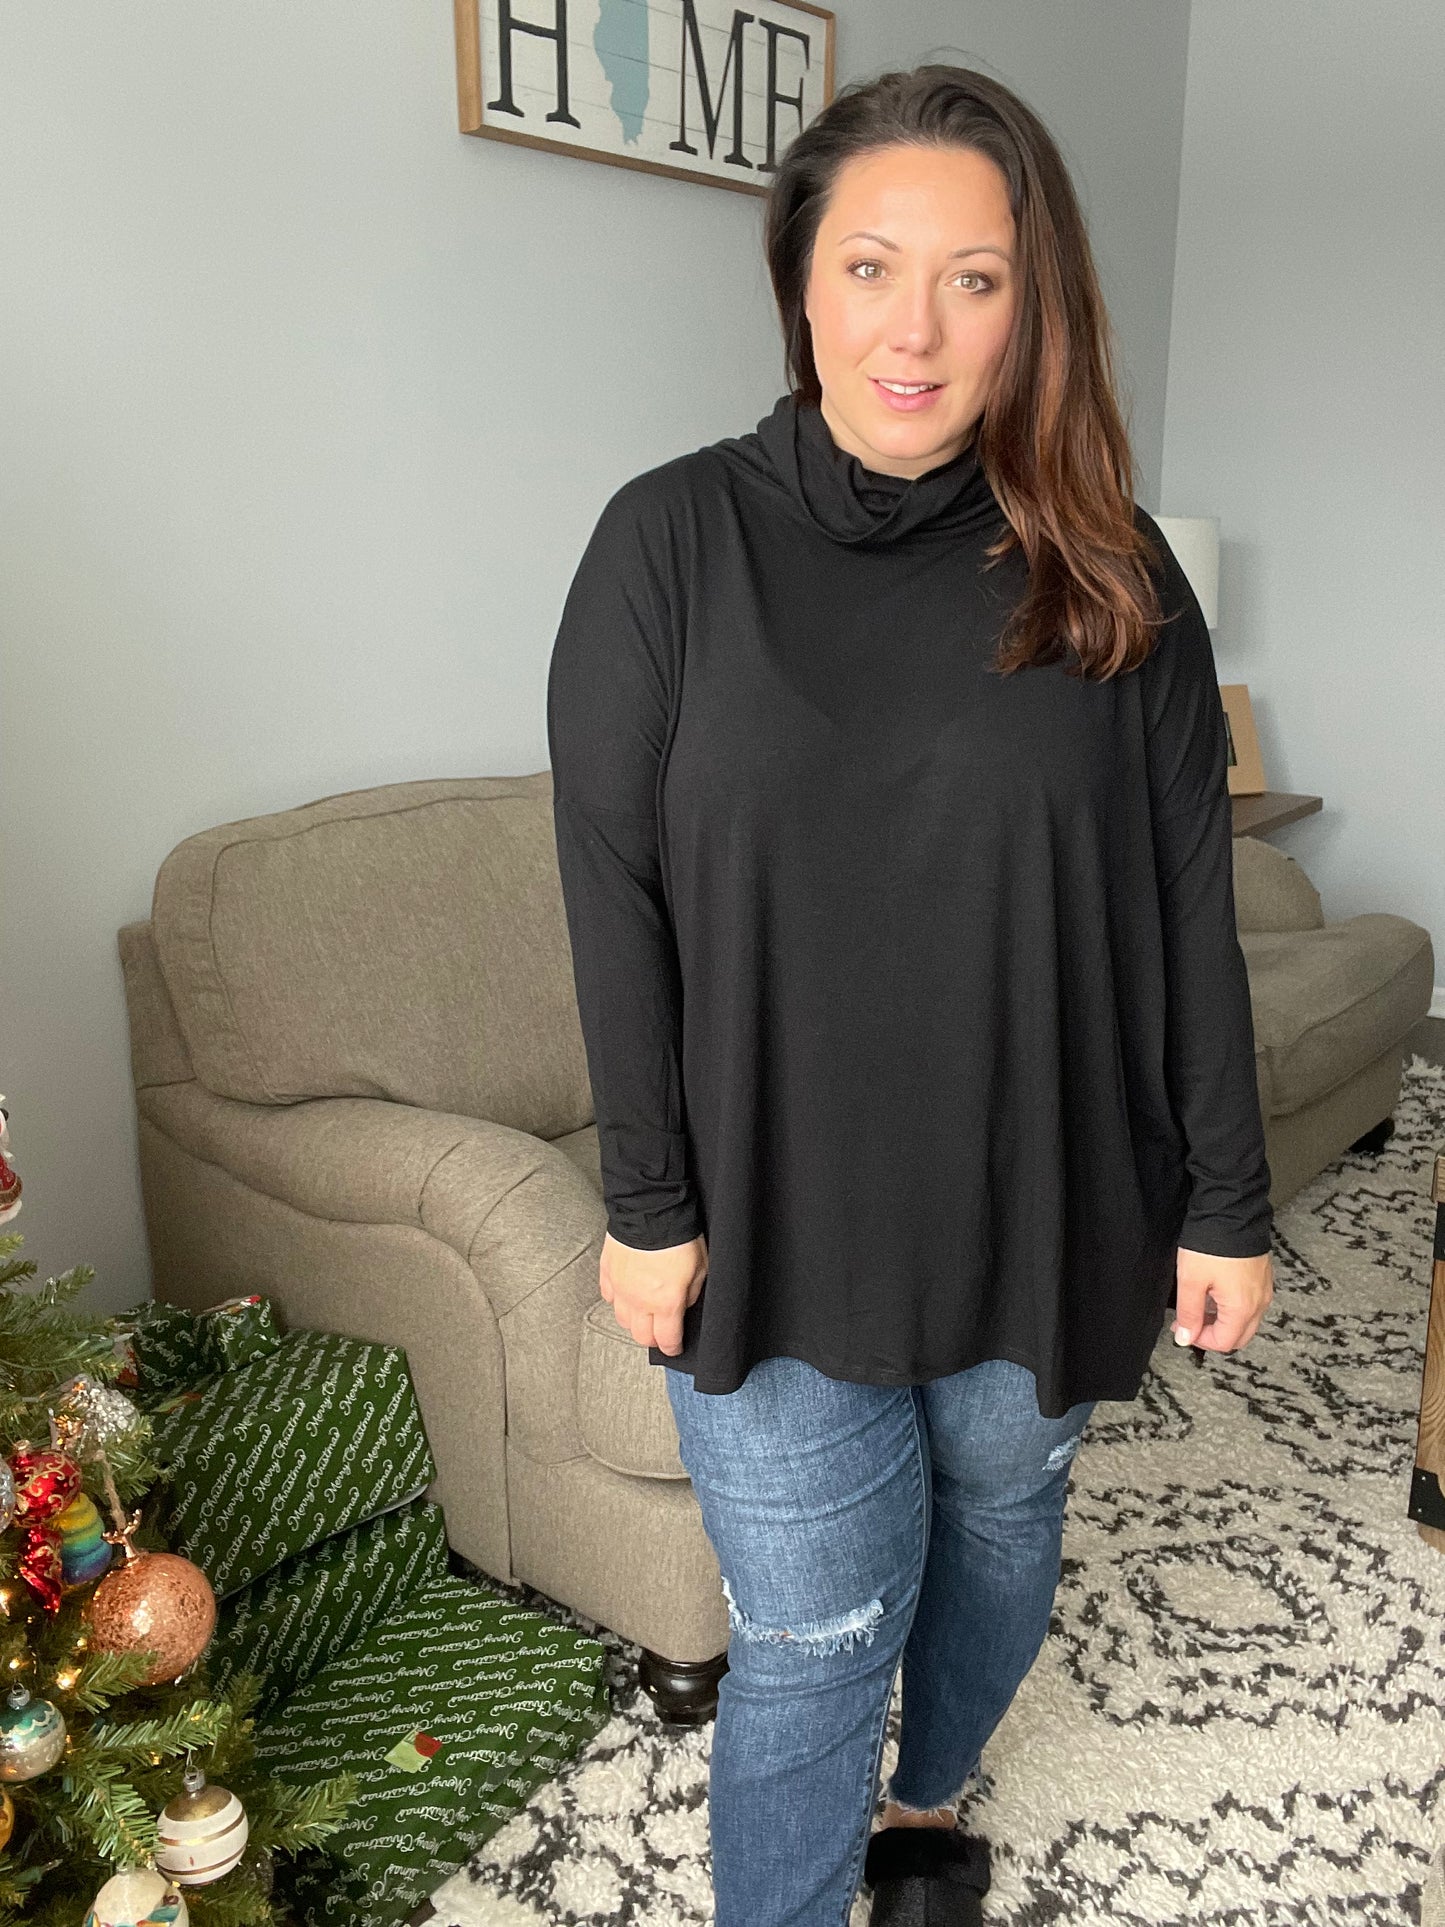 Hilton Cowl Neck Long Sleeve Top in Black